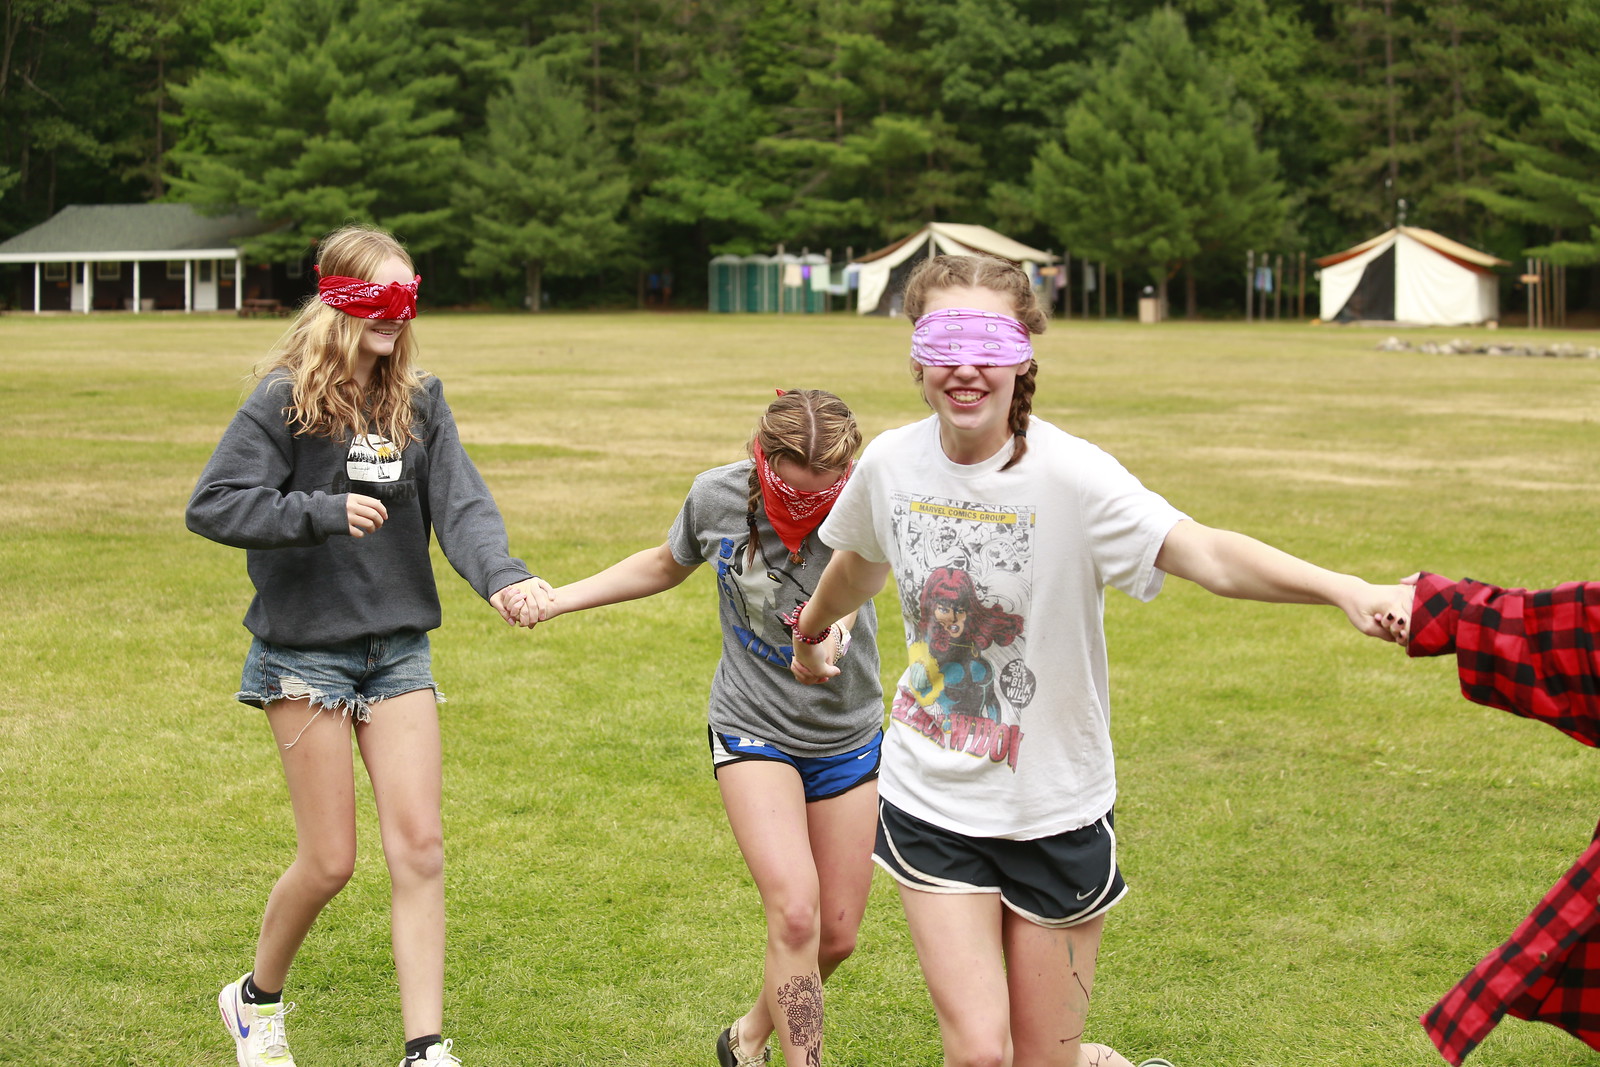 Girls blindfolded playing a fun game at YMCA Camp Jorn.